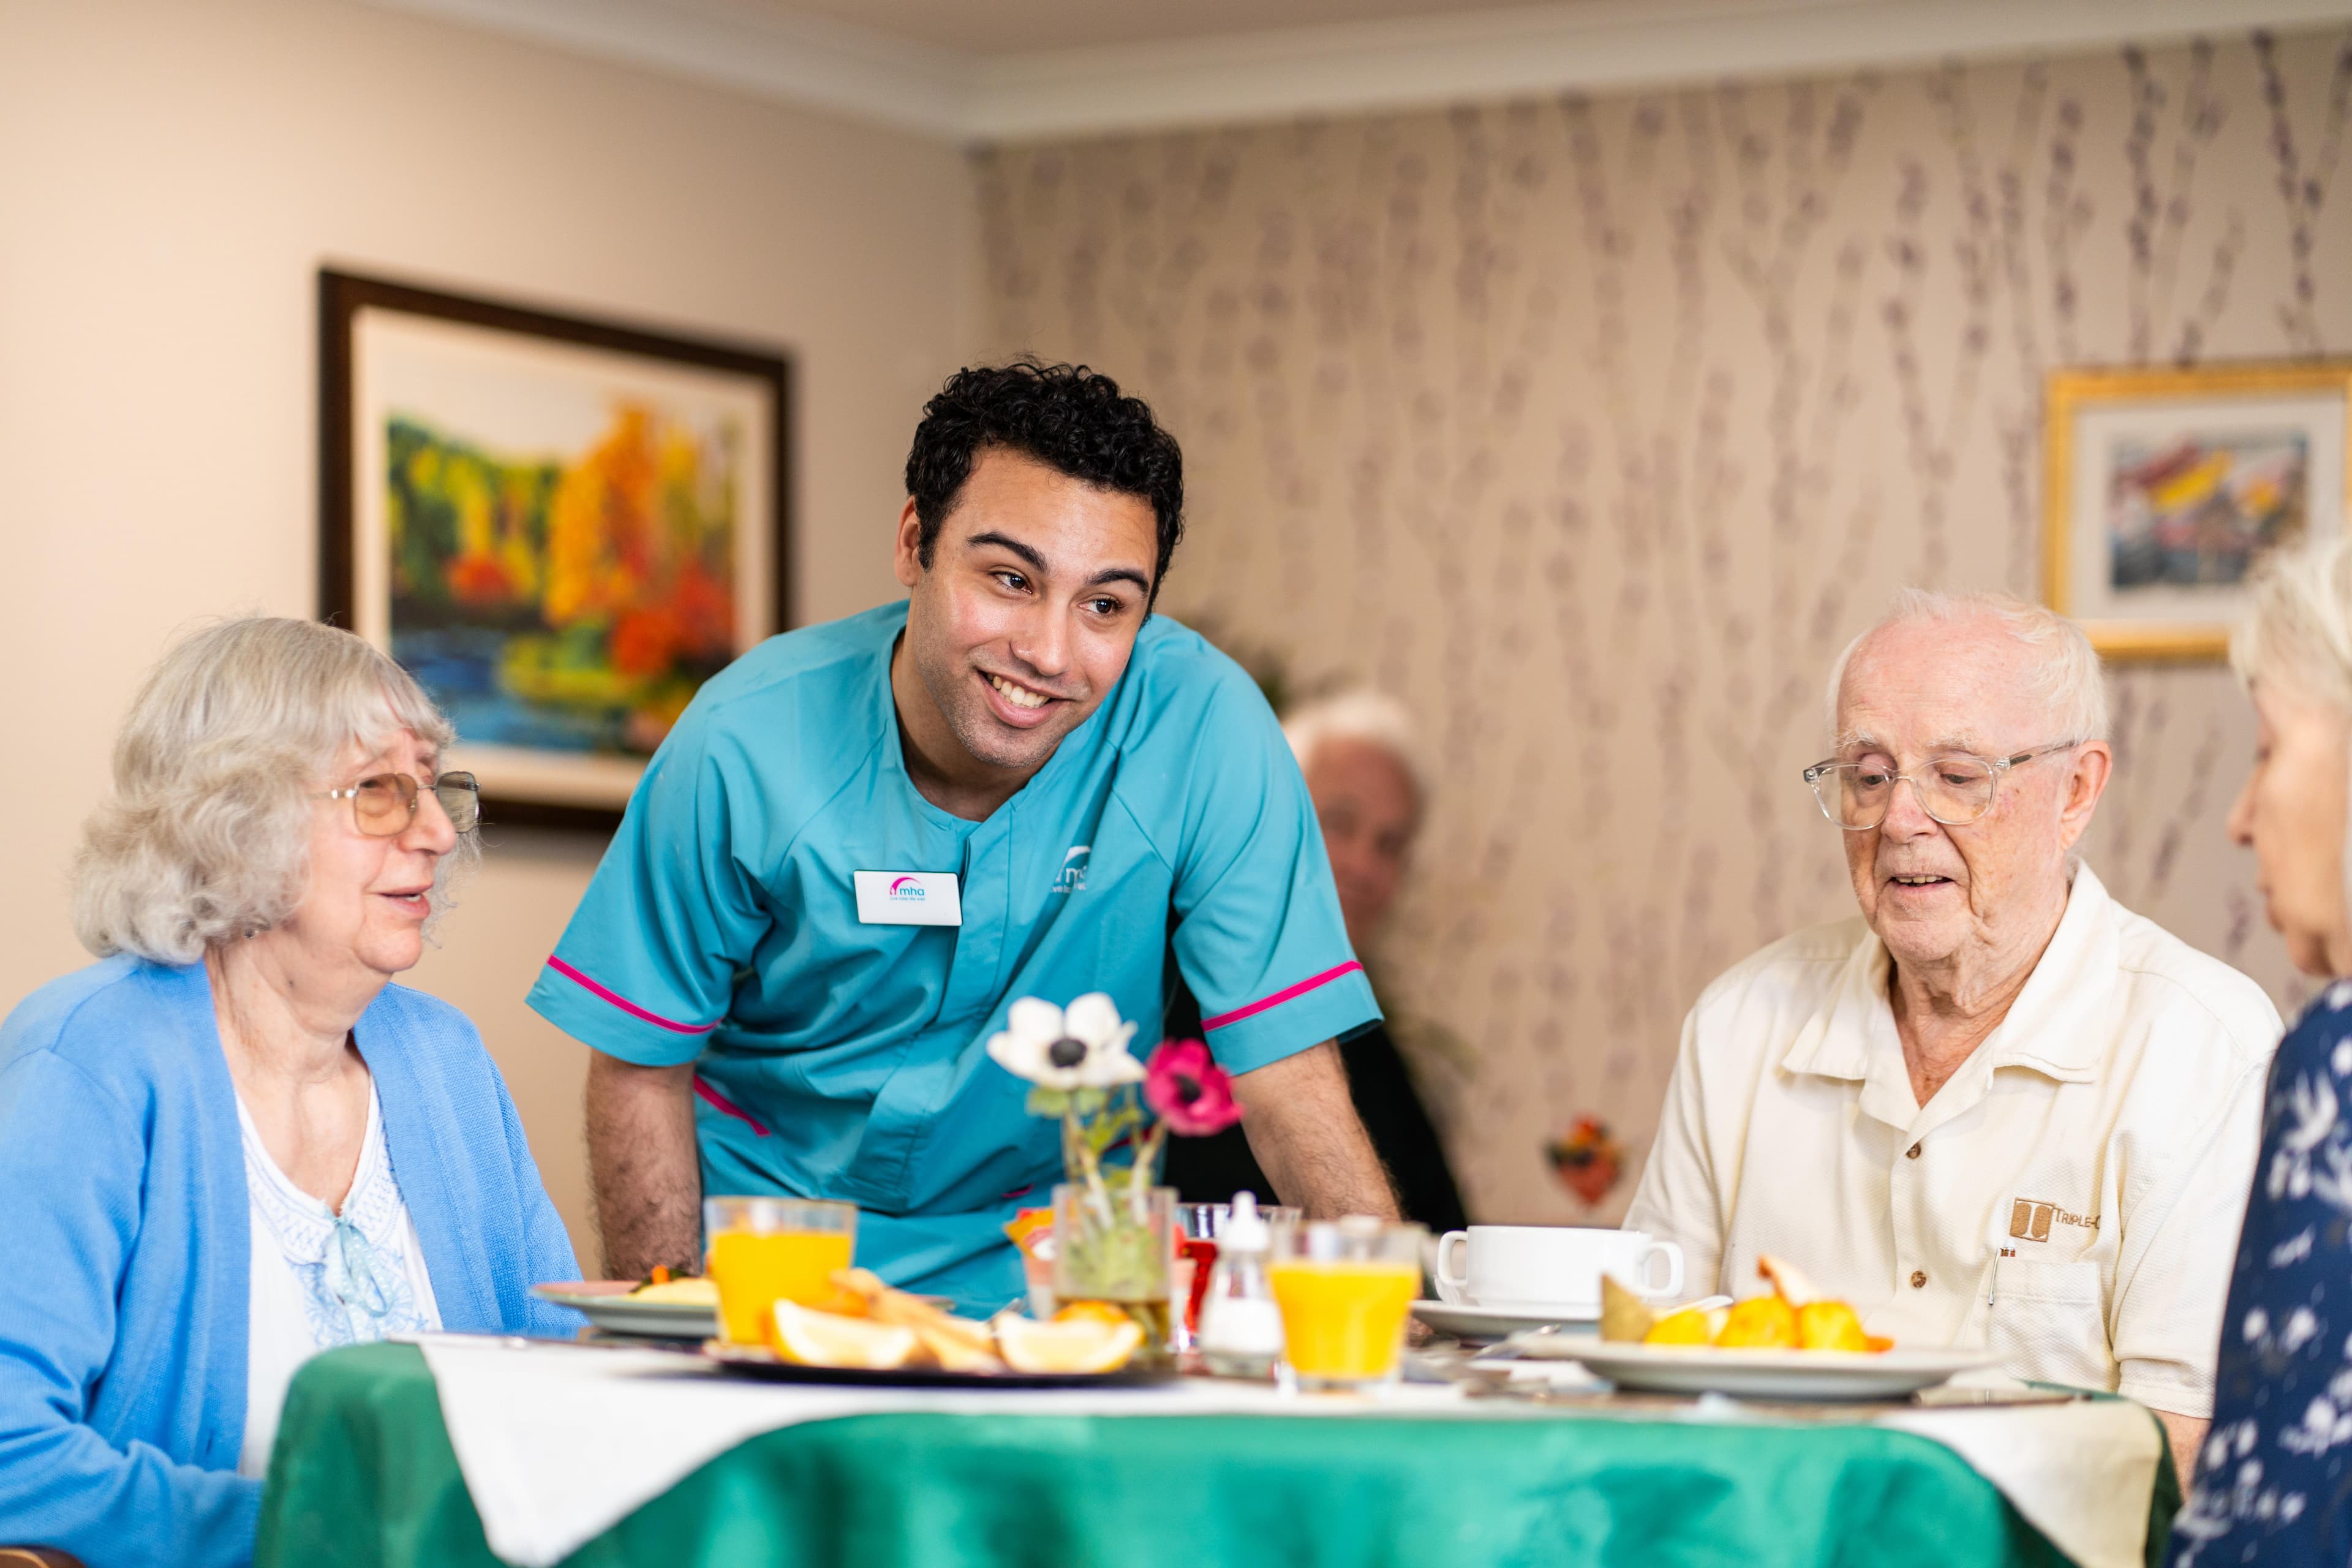 Male care assistant supporting care home residents during mealtime